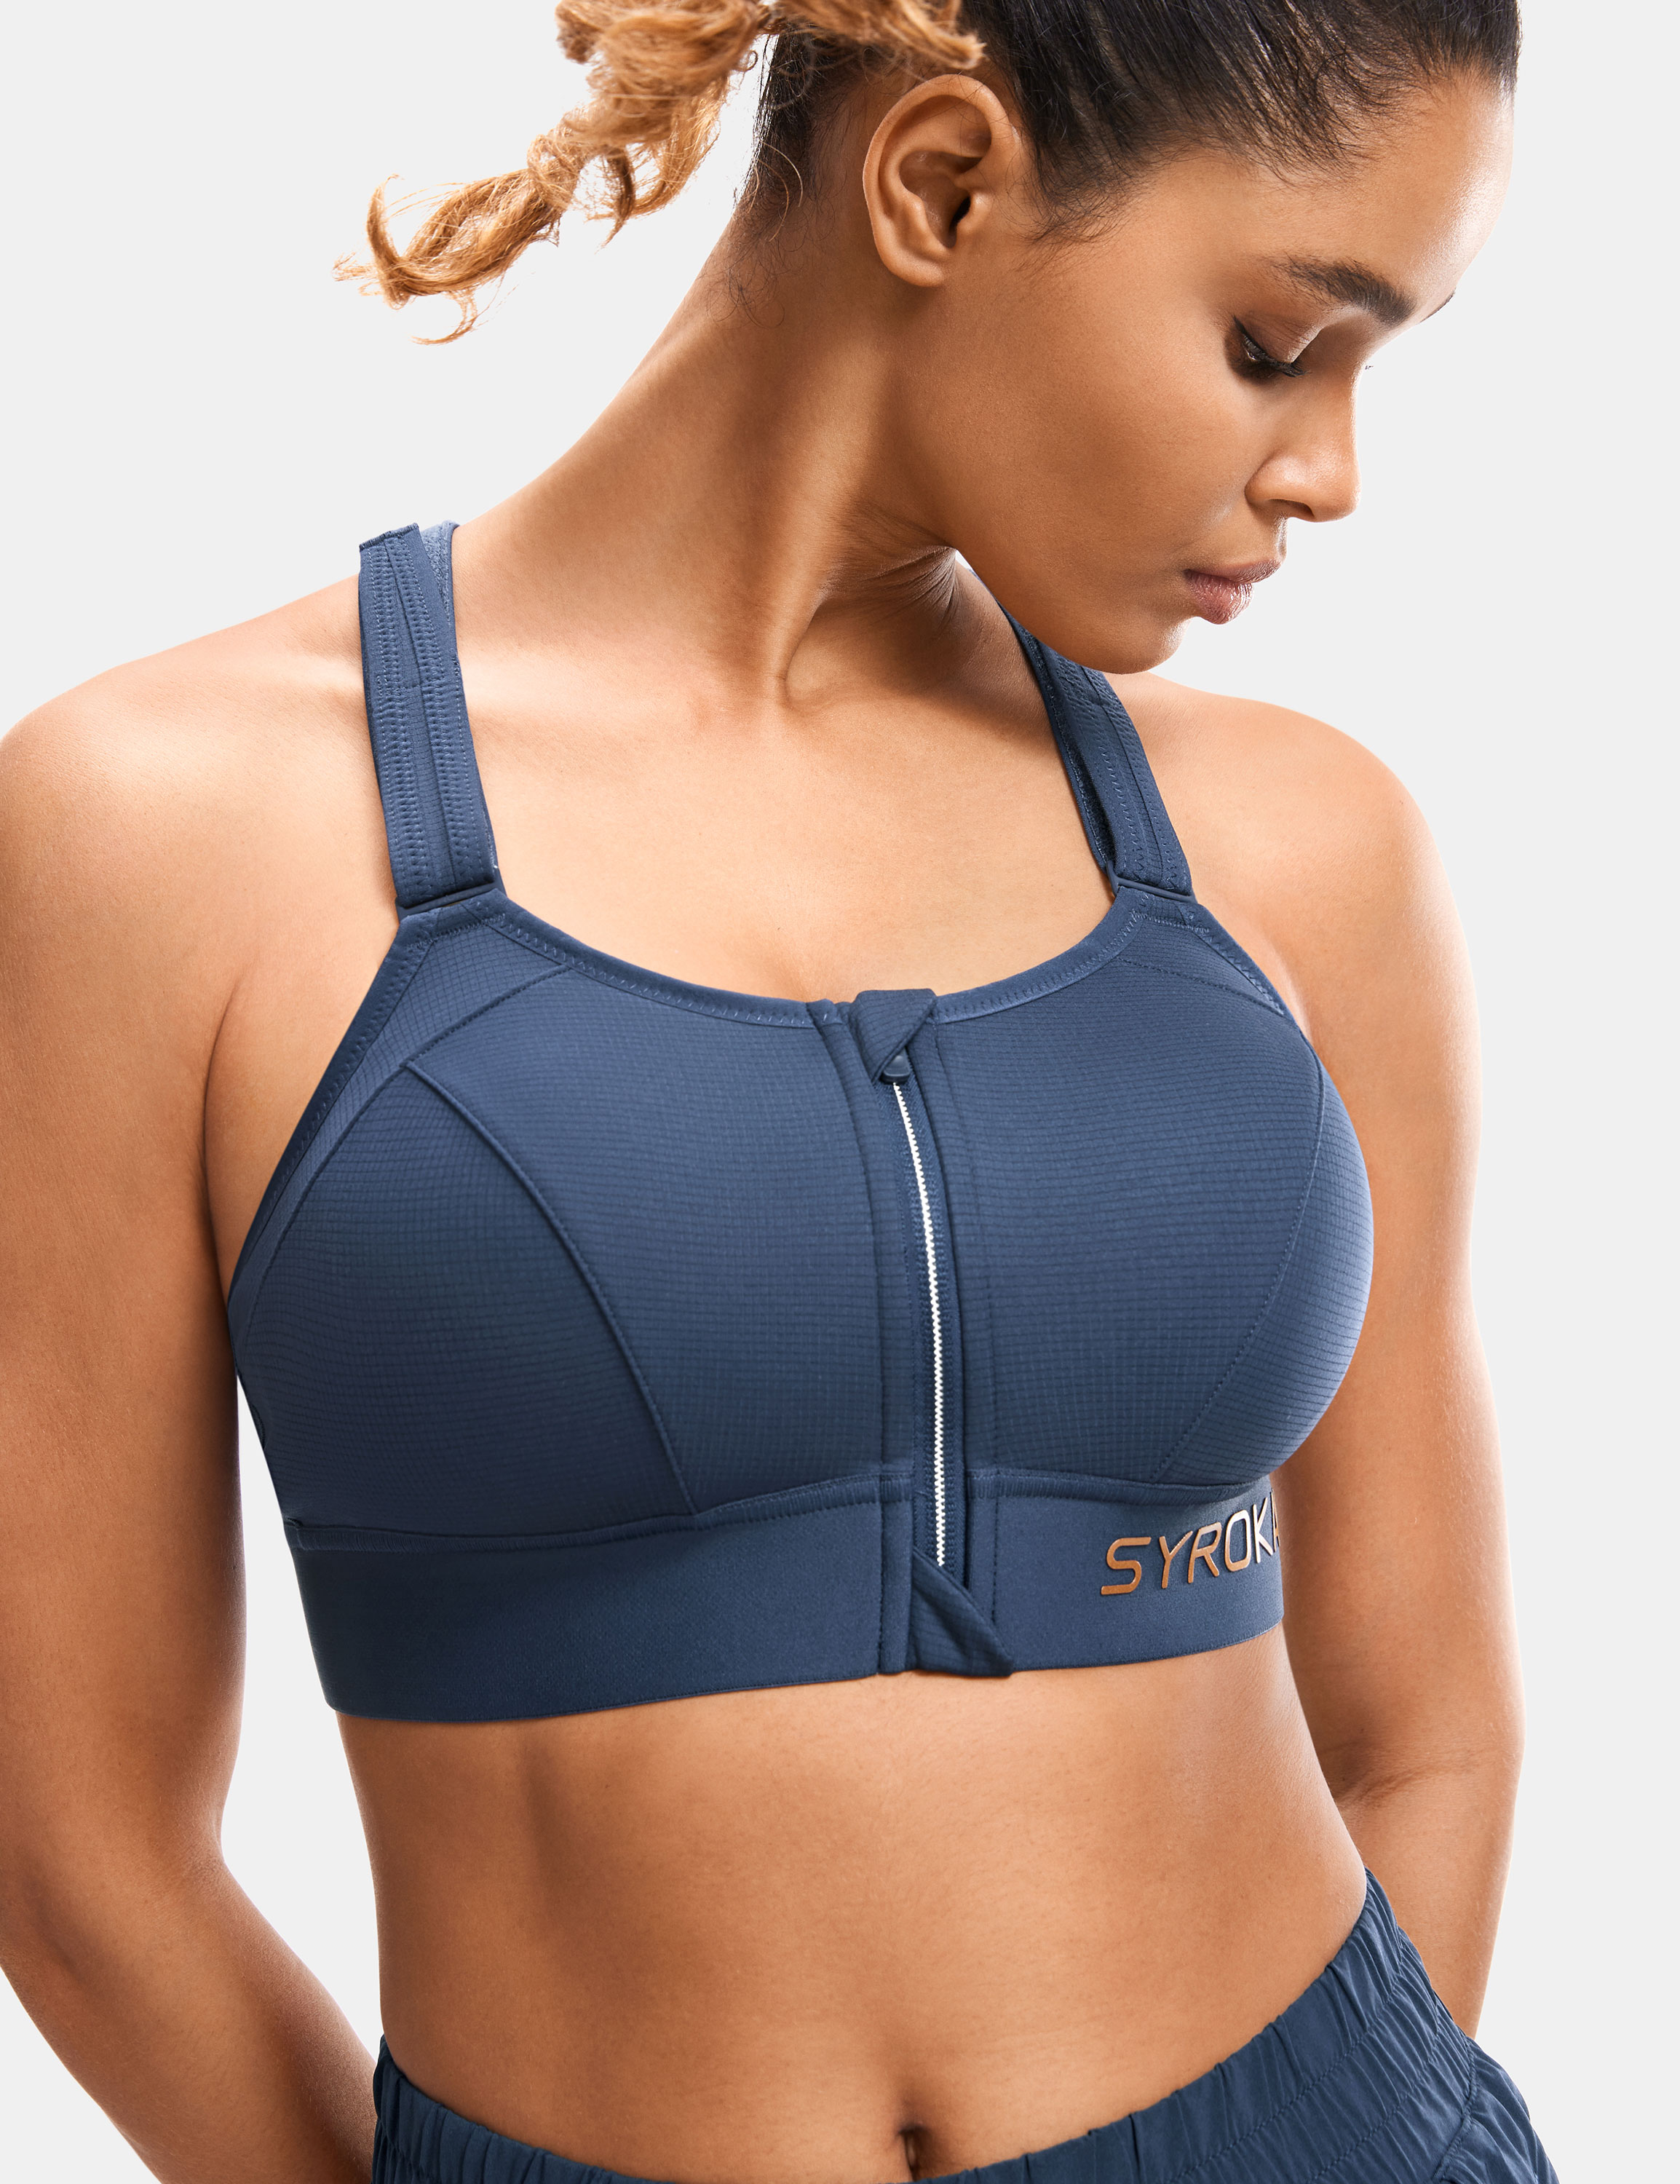 Sports Bras for Women with Large Busts: Finding the Right Fit and Support  by Swift Attire - Issuu